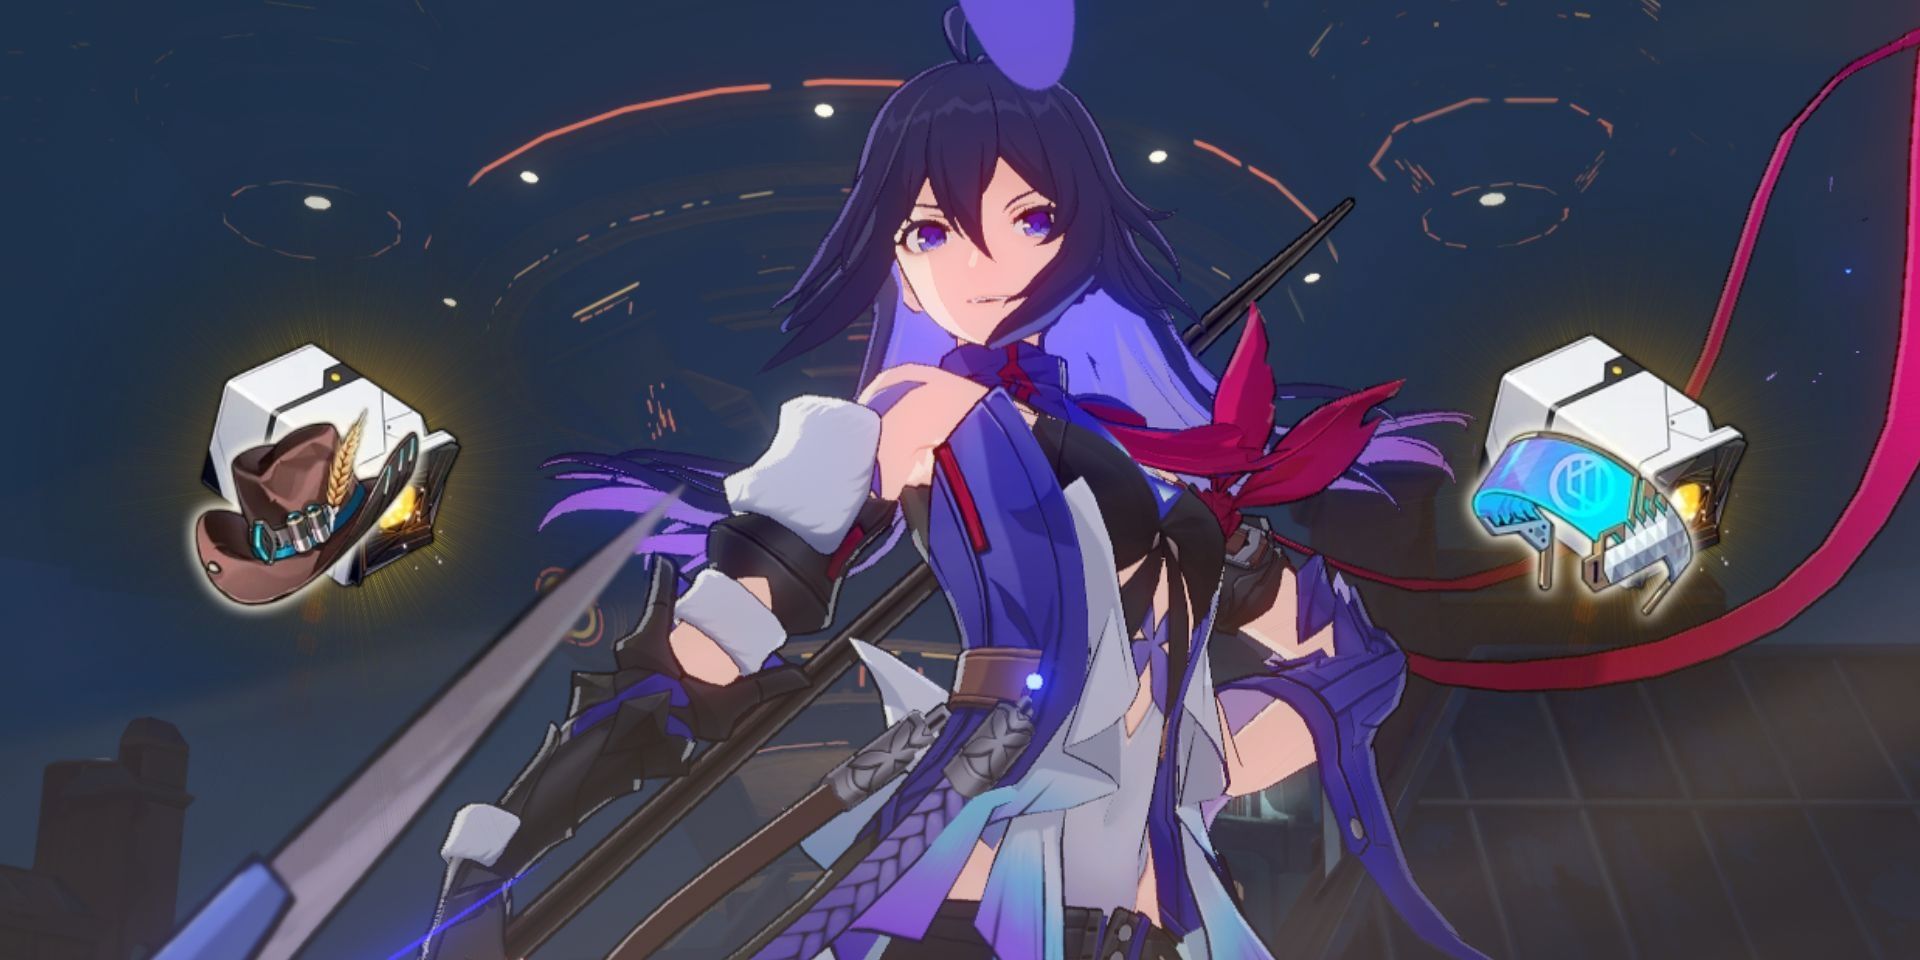 Honkai Star Rail's Seele strikes a pose in the middle while holding her scythe and smirking. On the left is a piece of the Musketeer of Wild Wheat Relic set, and on the right is a piece of the Genius of Brilliant Stars Relic set.